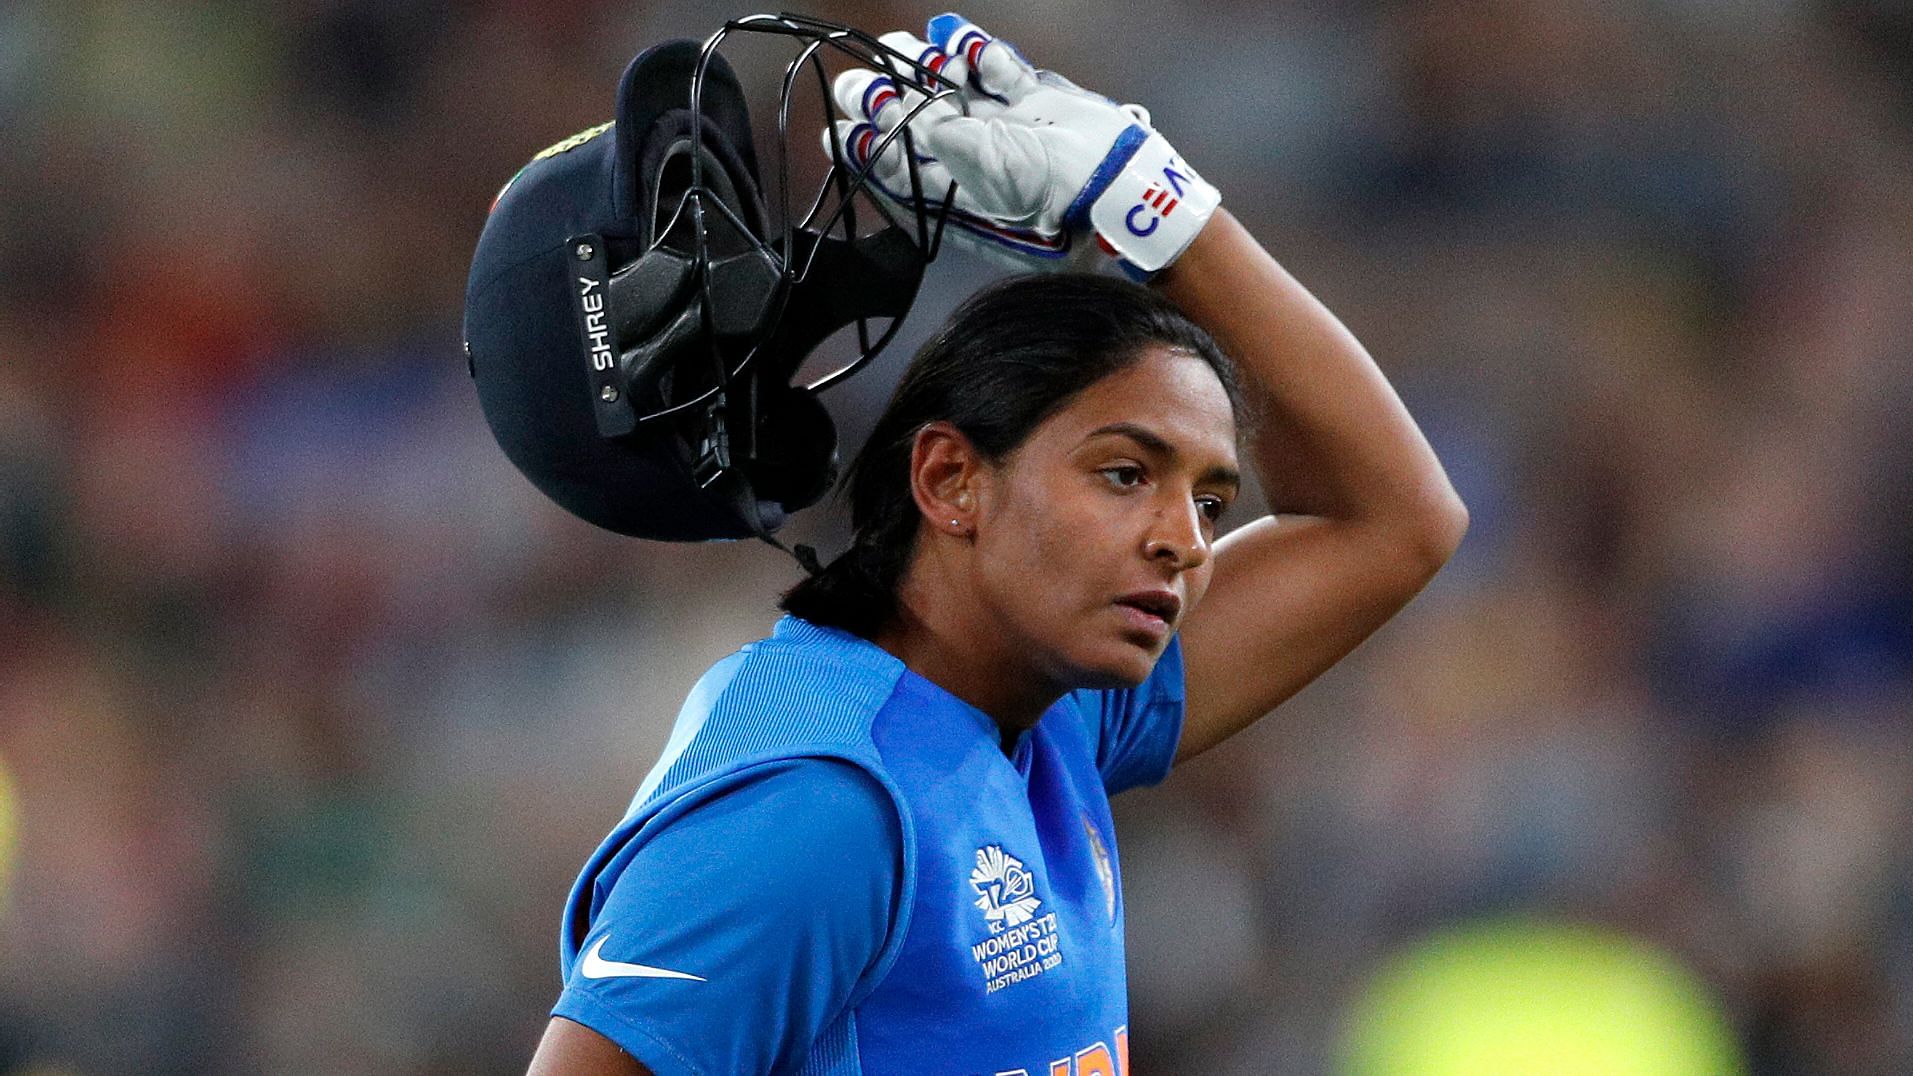 Live updates from the India vs Australia Women’s T20 World Cup final.